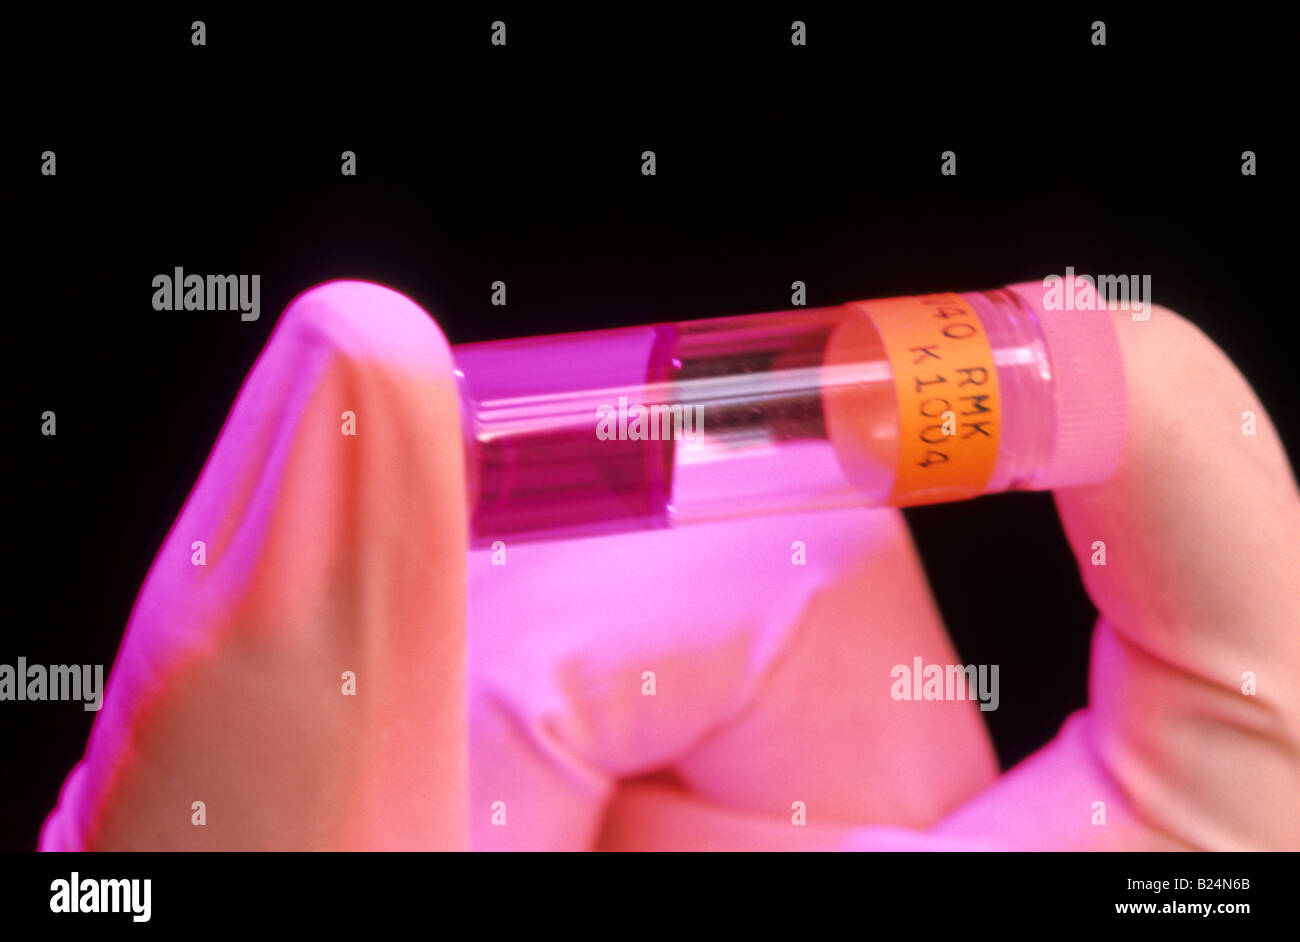 CLOSE UP GLOVED HAND HOLDING TEST TUBE Banque D'Images